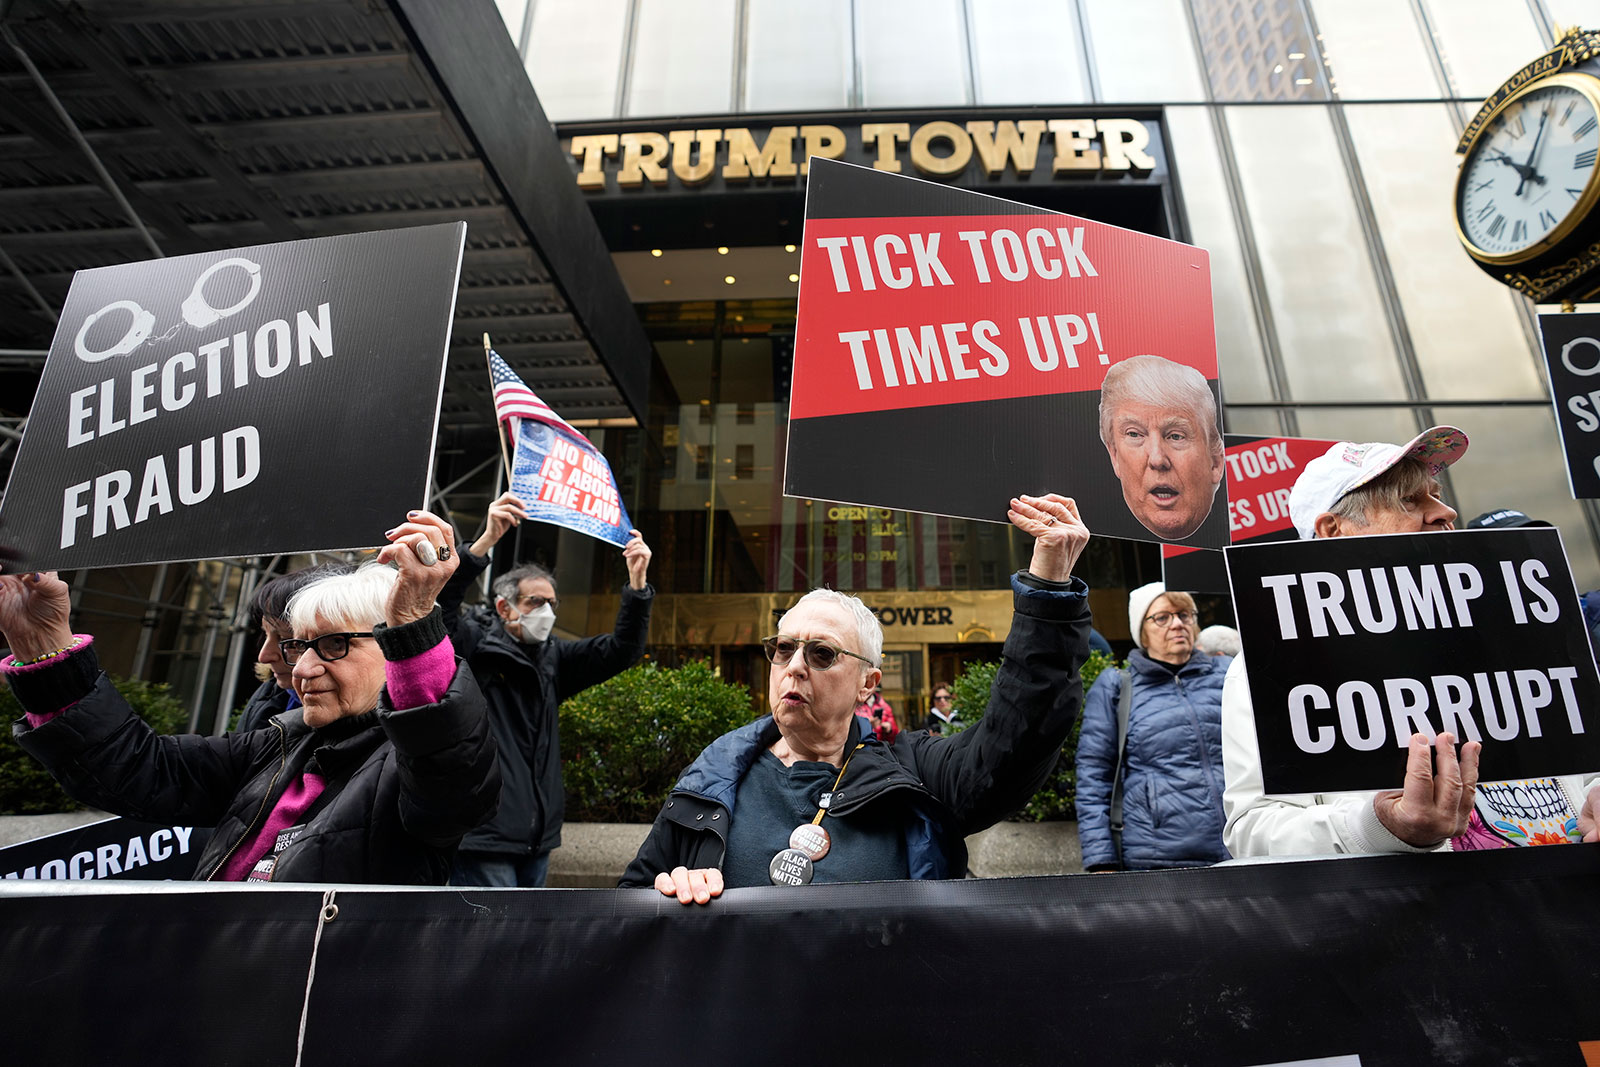 Protesters gather outside Trump Tower on Friday, March 31, in New York.